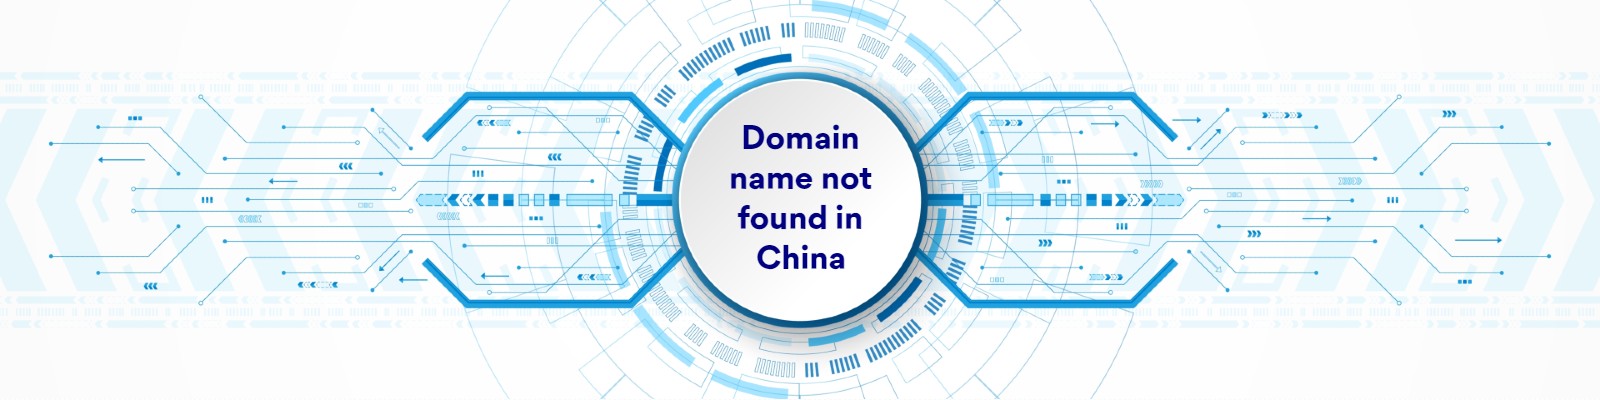 Domain name not seen in China